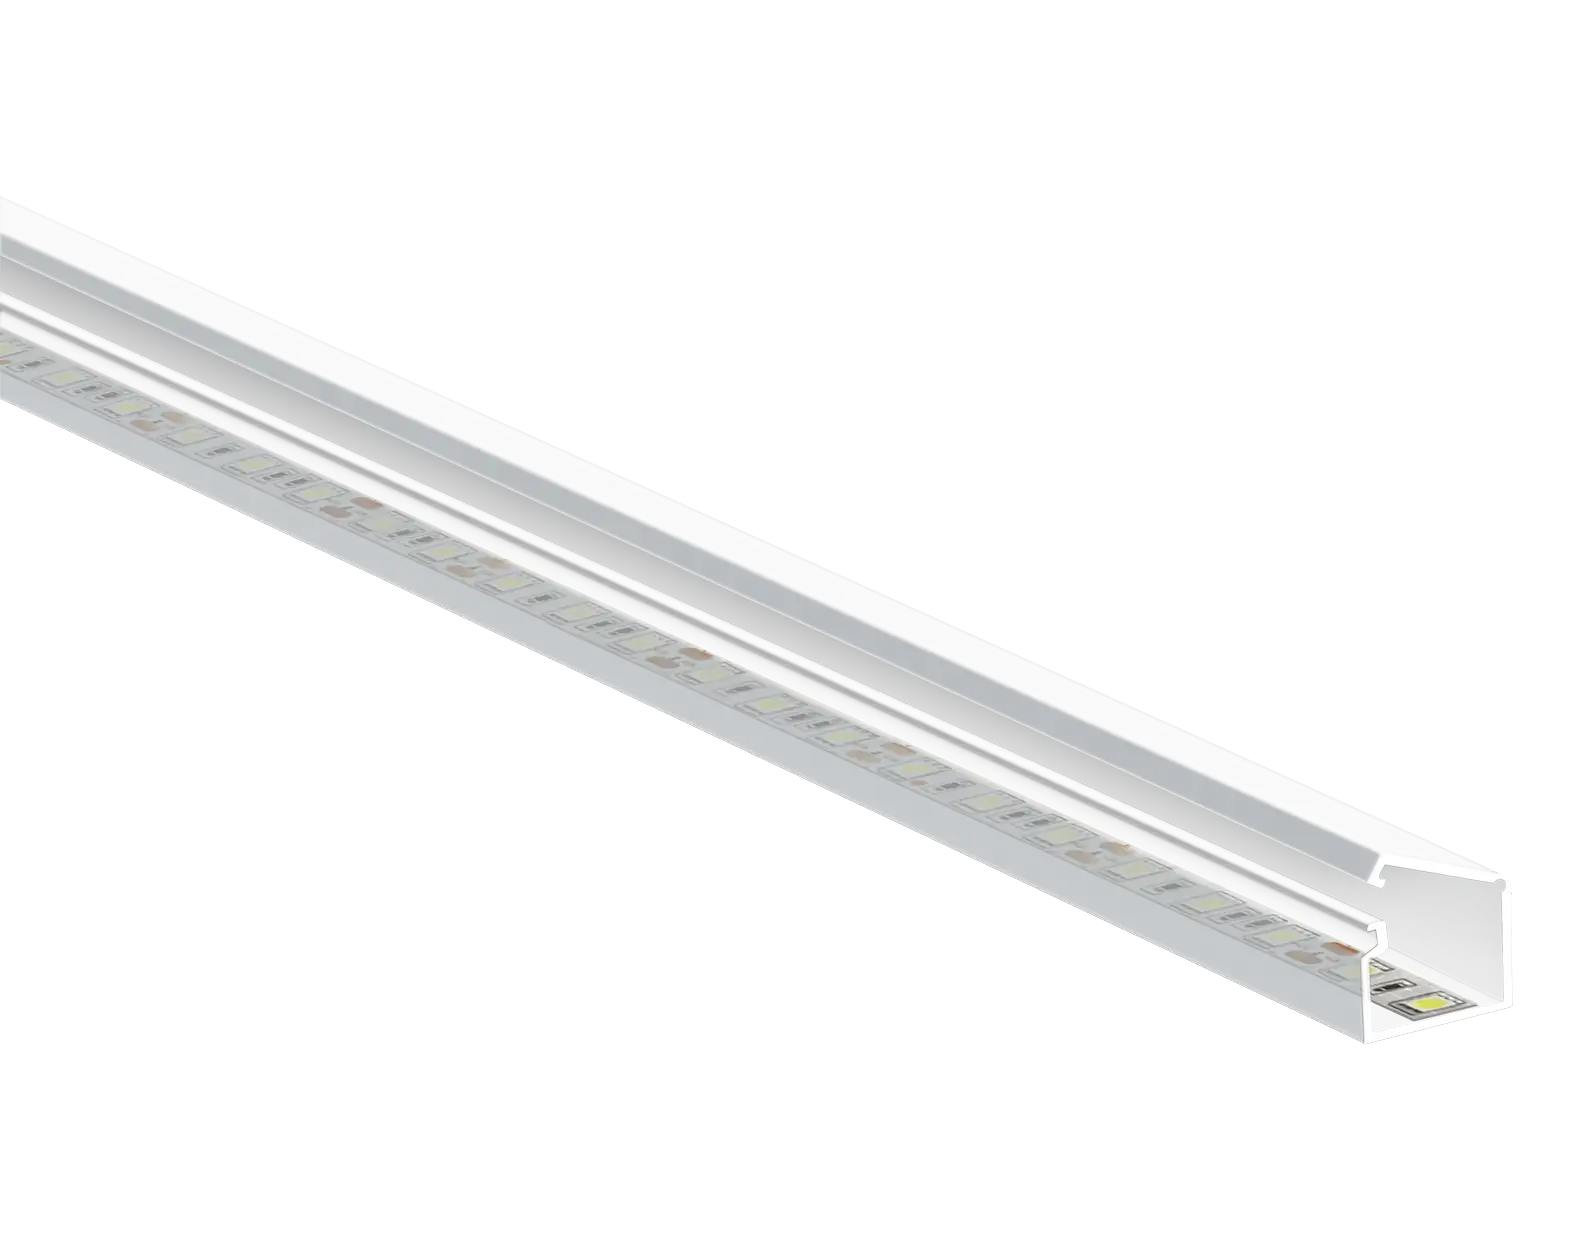 https://www.buykanat.com/eco-series-intrinsic-cover-transparent-cable-trunking-with-led-box-adhesive-cable-trunkings-and-accessories-mutlusan-kablo-kanallari-buykanat-16568-59-B.webp